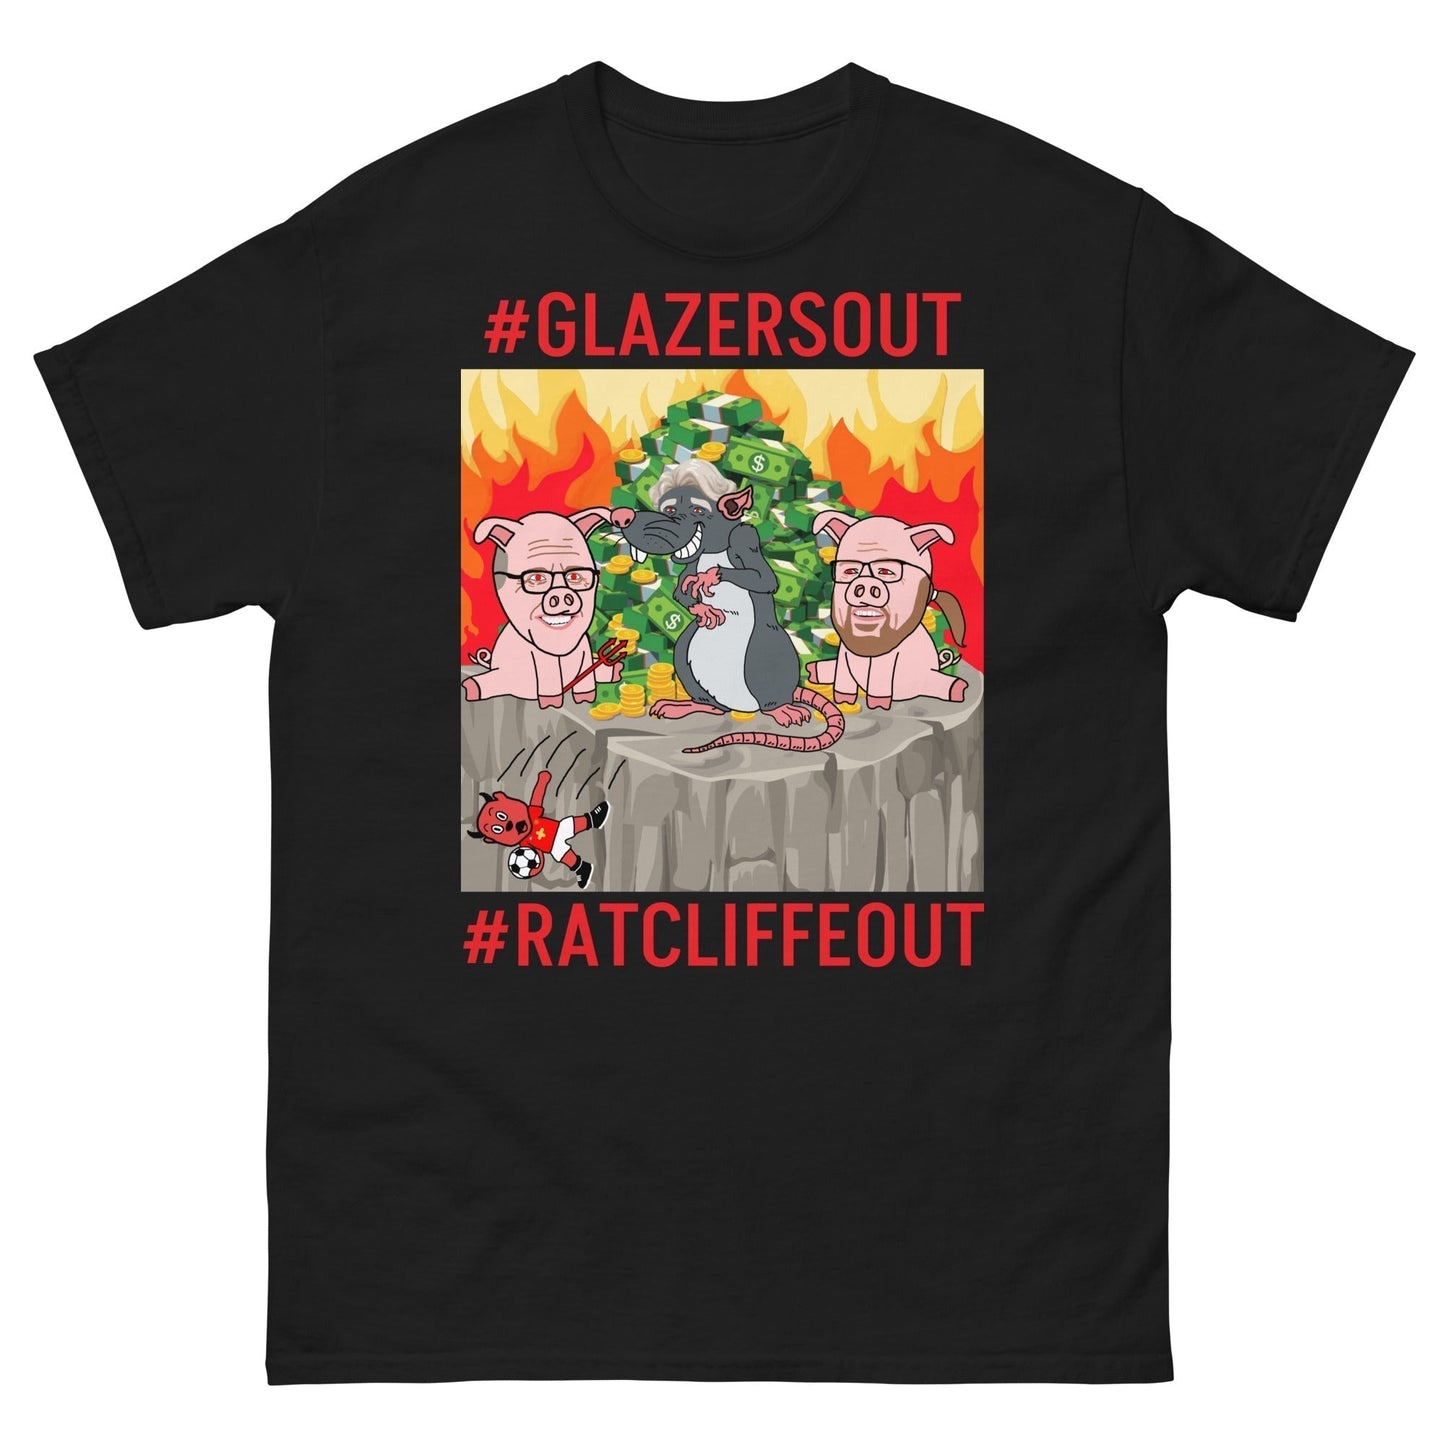 Manchester United Ratcliffe Out, Glazers Out T-shirt, Red Letters, #GlazersOut #RatcliffeOut Next Cult Brand Football, GlazersOut, Manchester United, RatcliffeOut